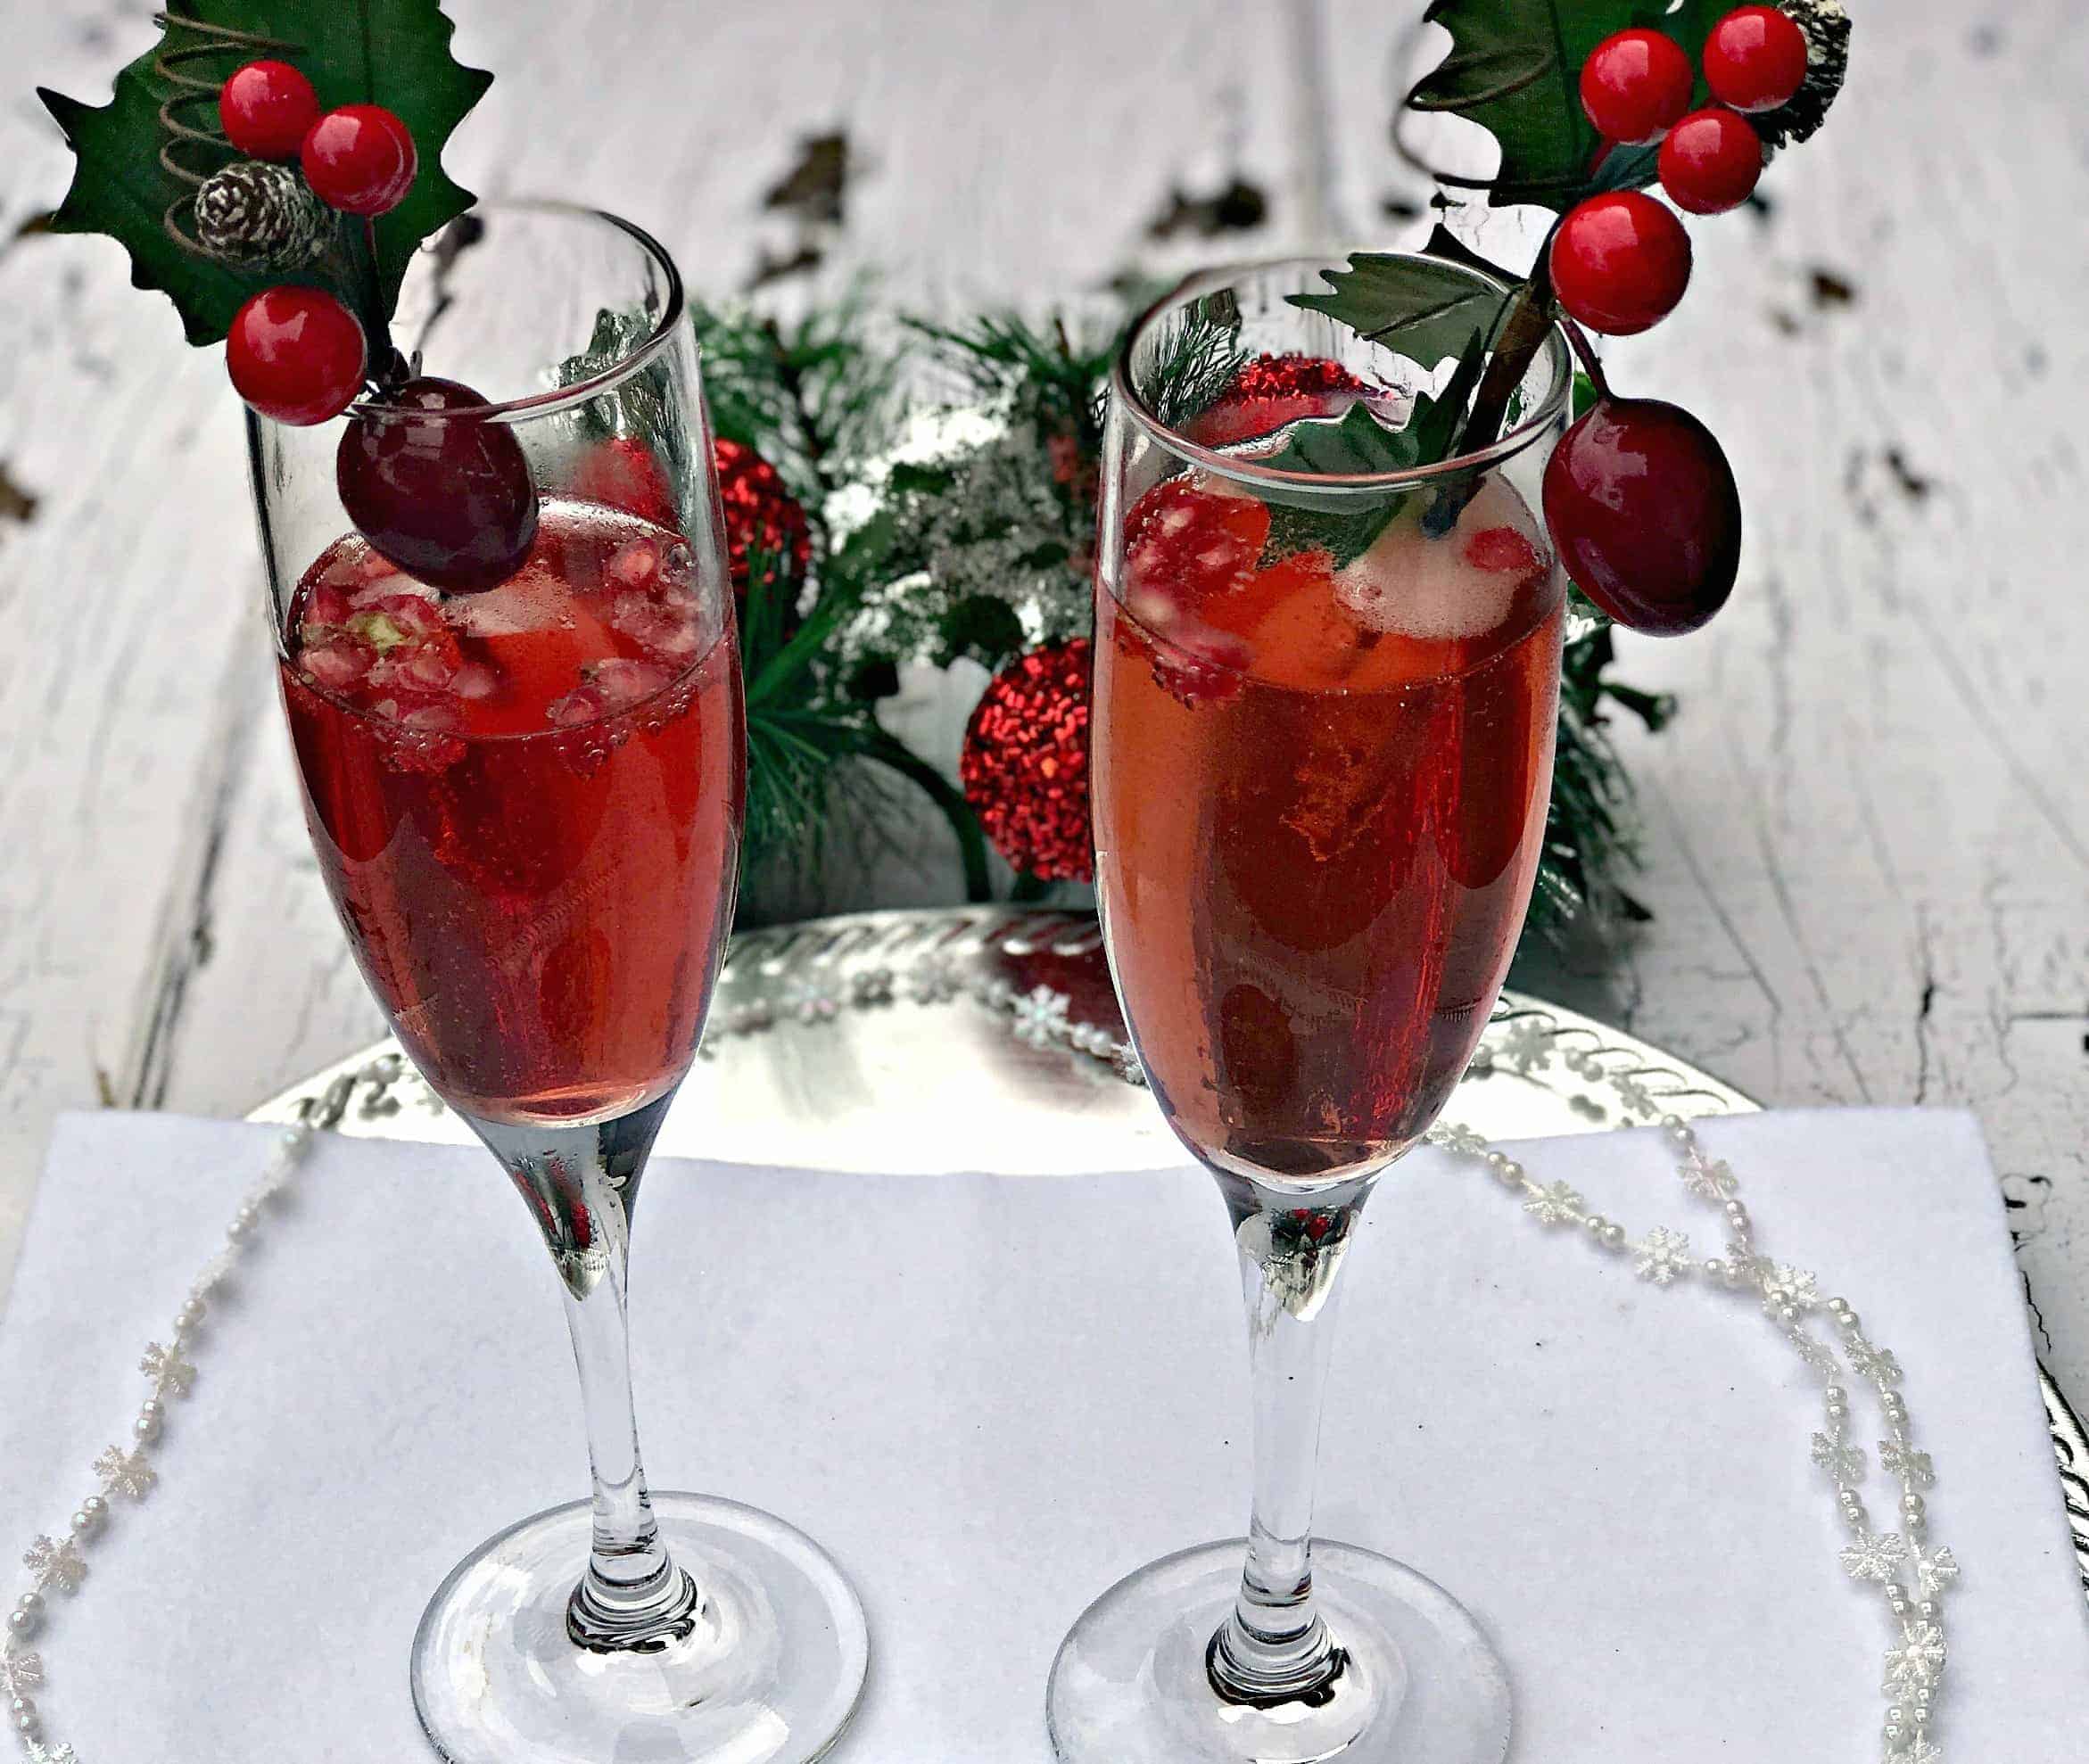 2 champagne flutes containing pomegranate mimosas, pomegranate seeds, and holiday decor